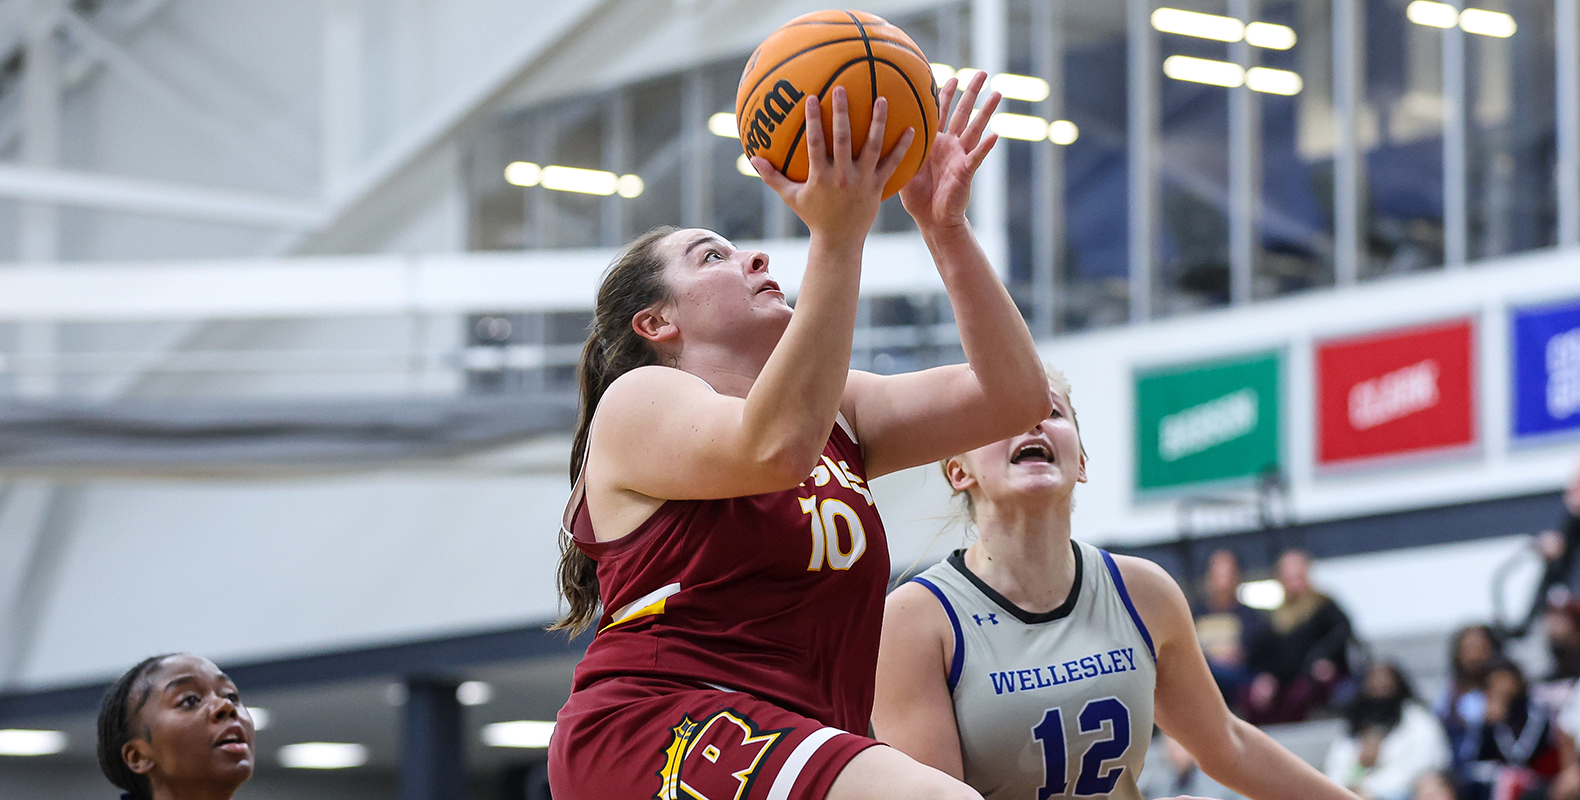 Regis Drops to Lasell, 73-61